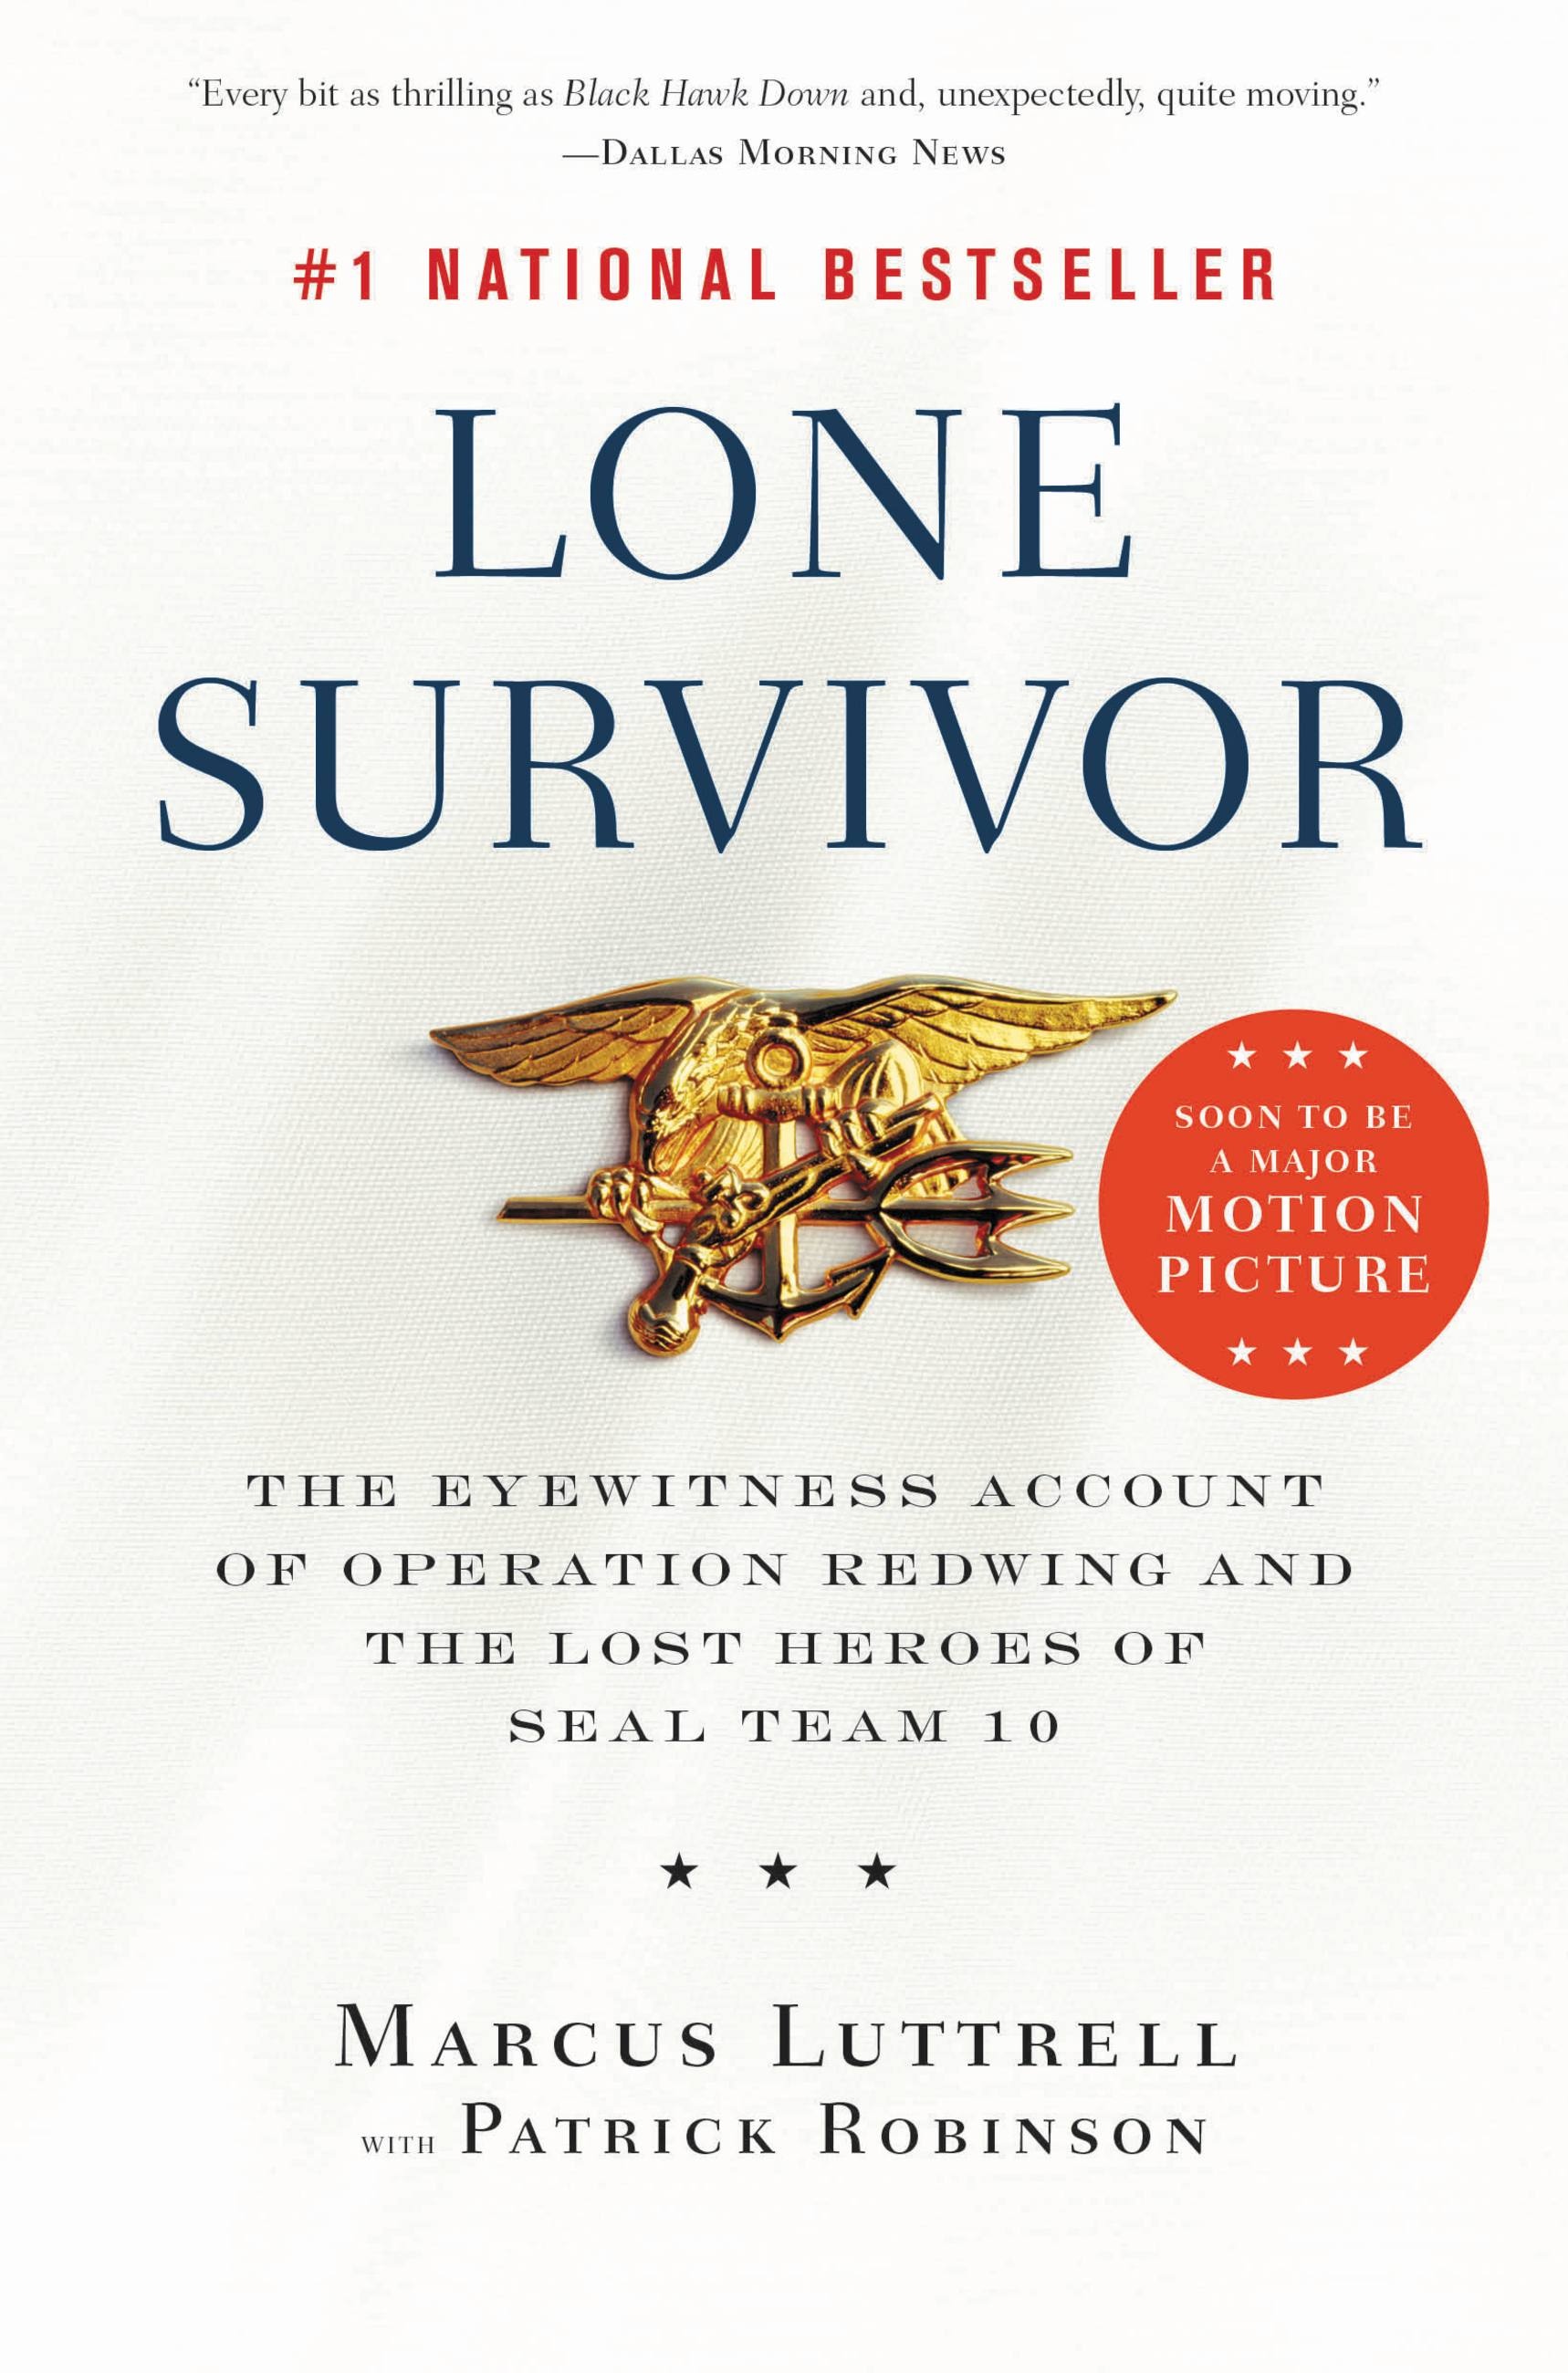 Real 'Lone Survivor' SEAL: Coming out alive 'not a victory